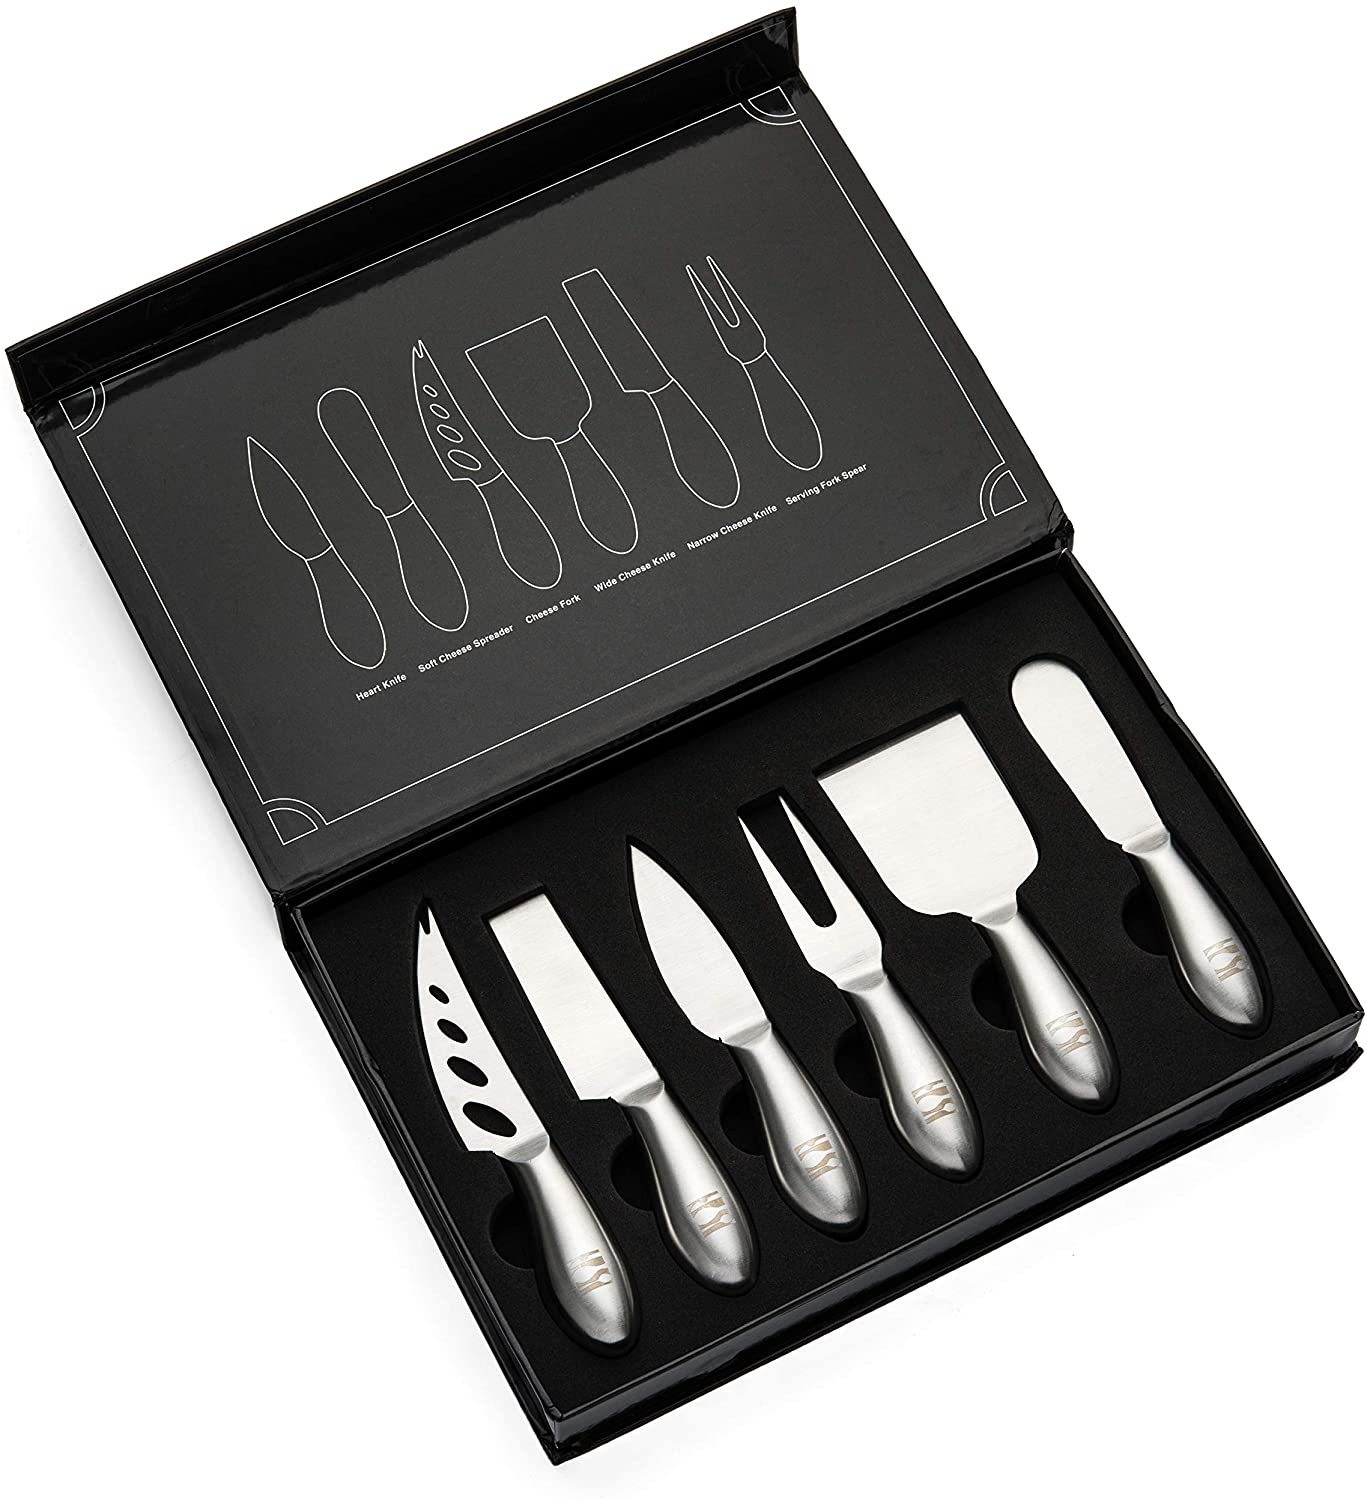 Hudson Essentials Stainless Steel Cheese Knife Set – 6 Knives